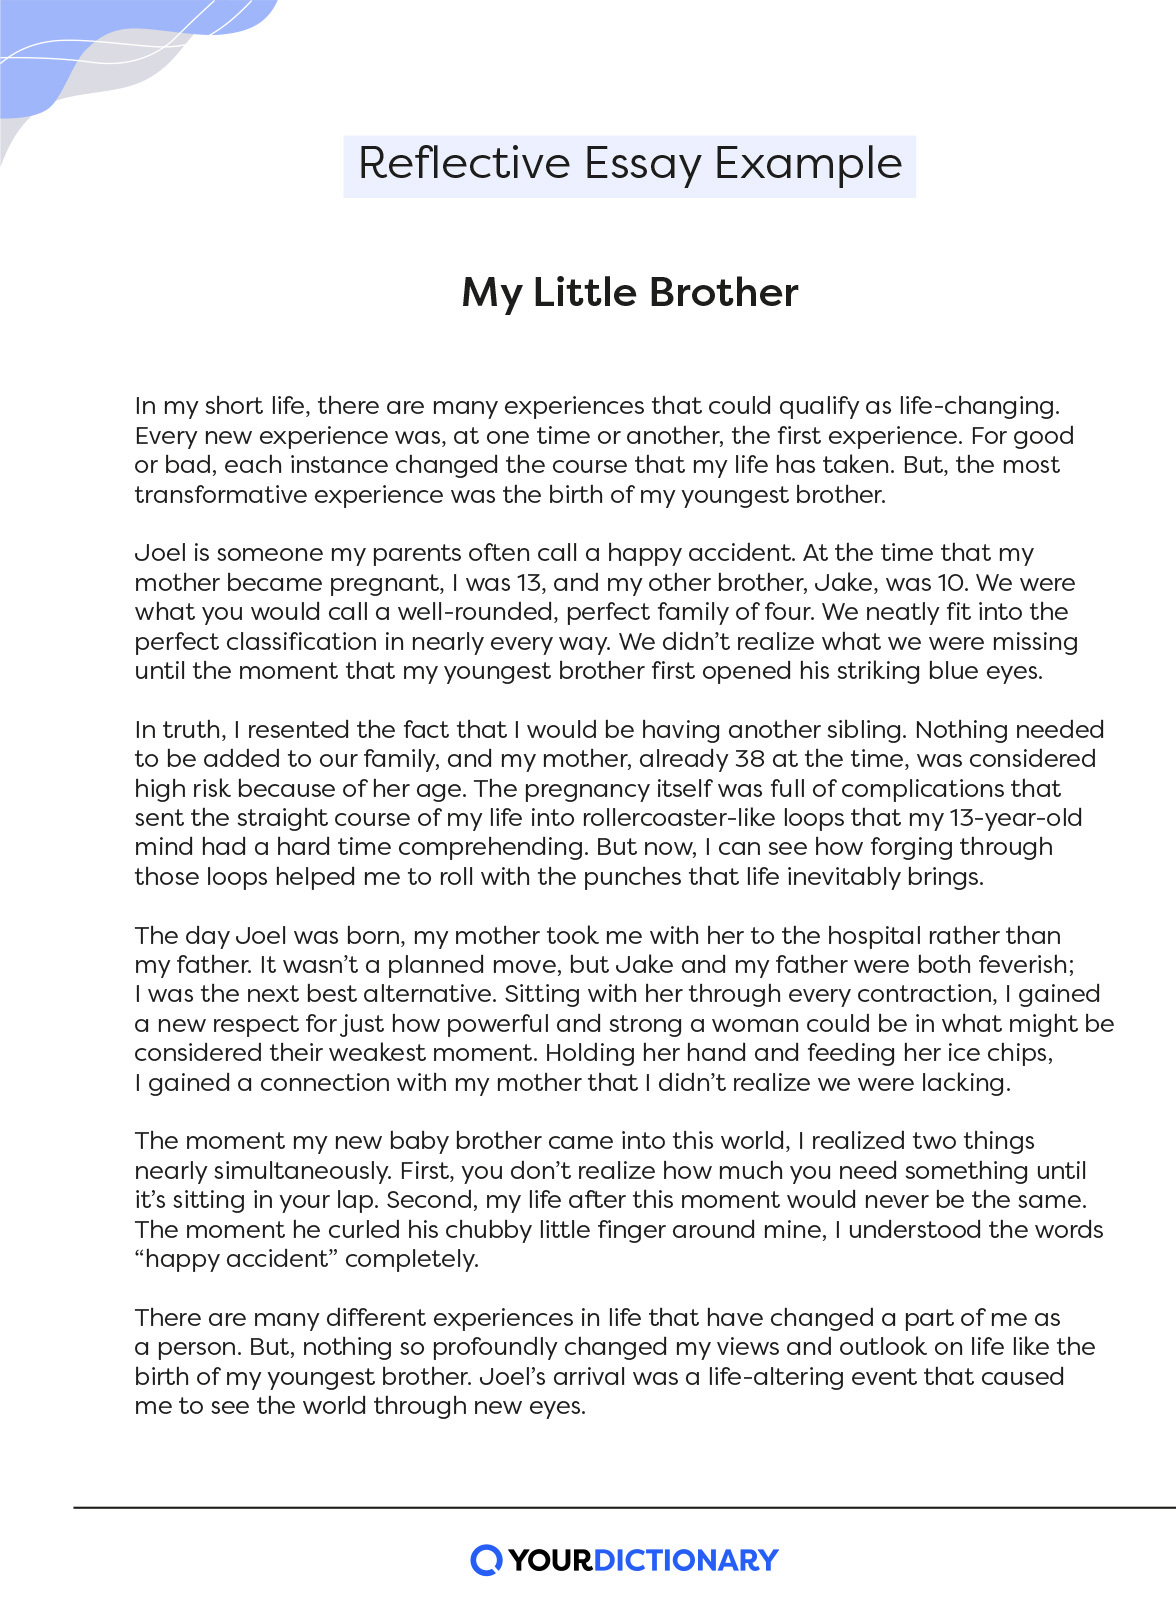 Reflective essay example about brother